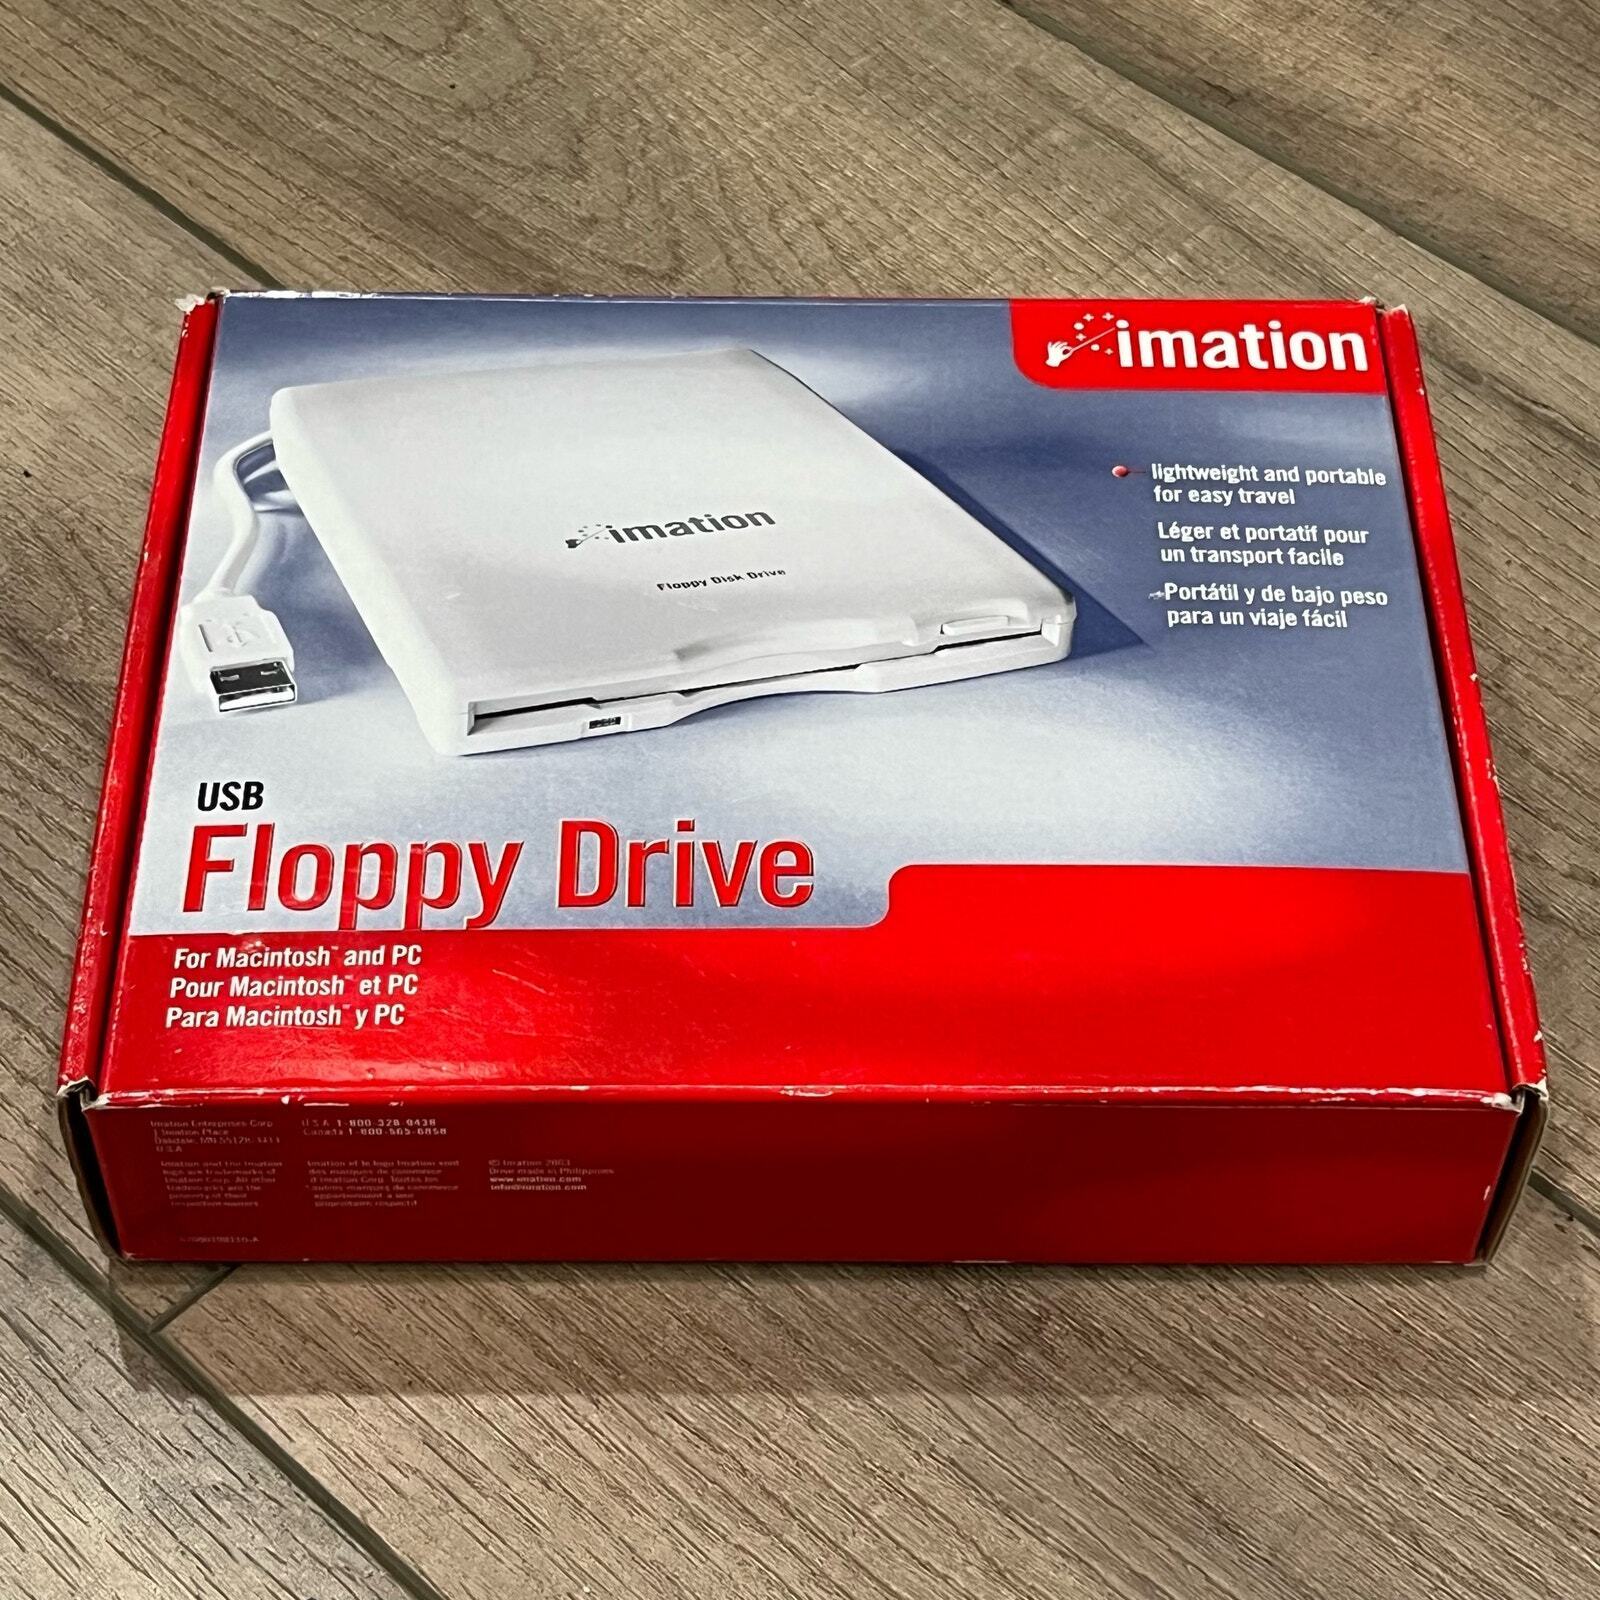 Imation USB Floppy Drive Model D353FUE For Macintosh & PC Systems 